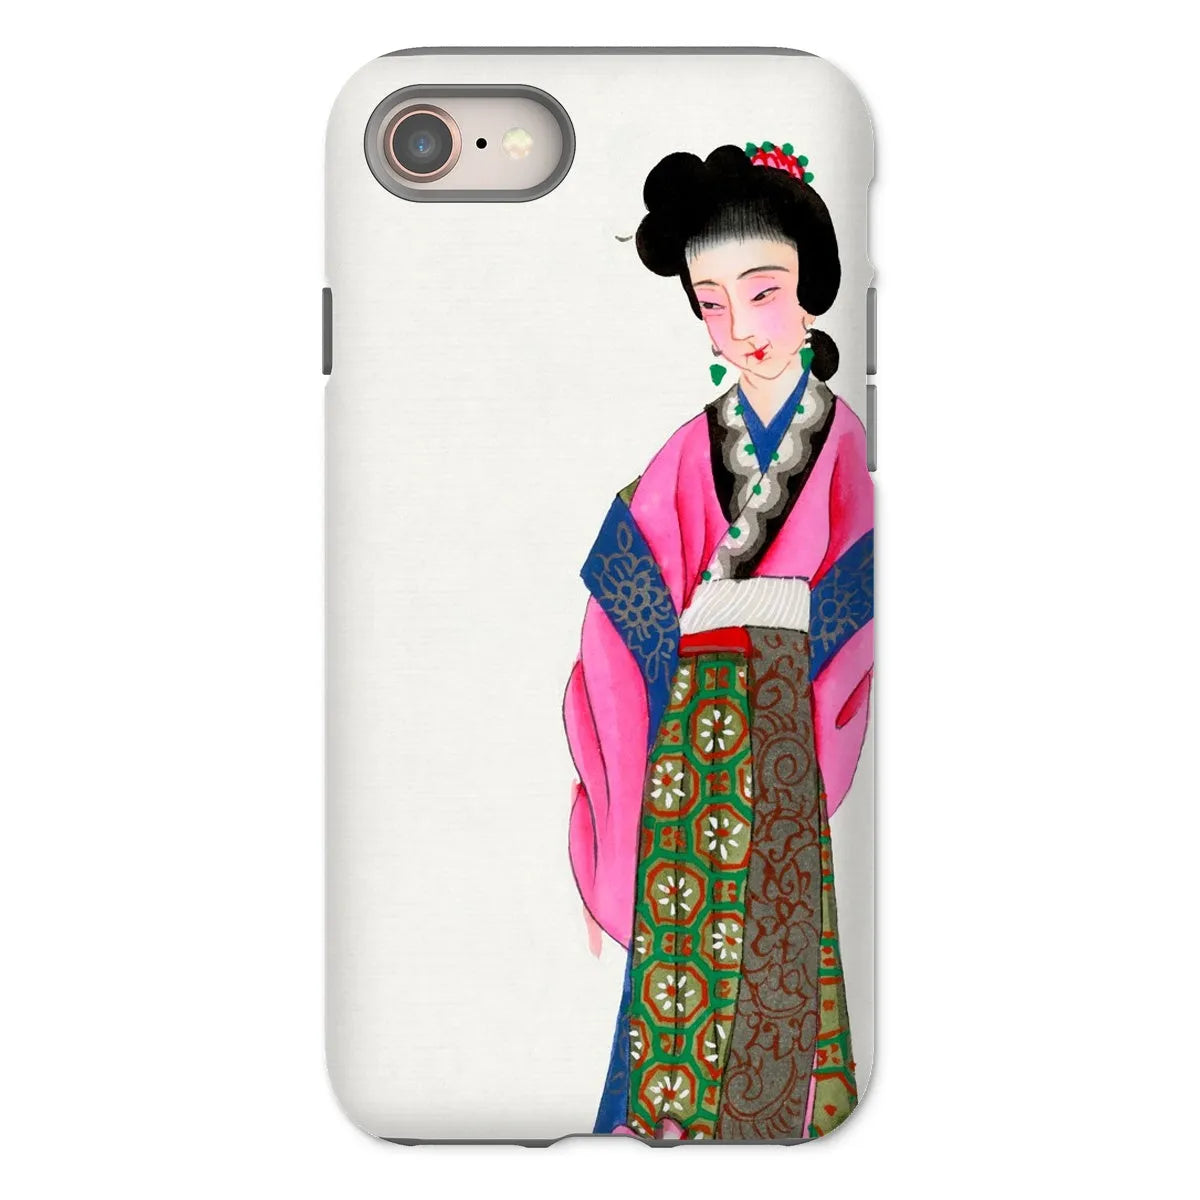 Noblewoman - Chinese Aesthetic Manchu Art Phone Case - Iphone 8 / Matte - Mobile Phone Cases - Aesthetic Art